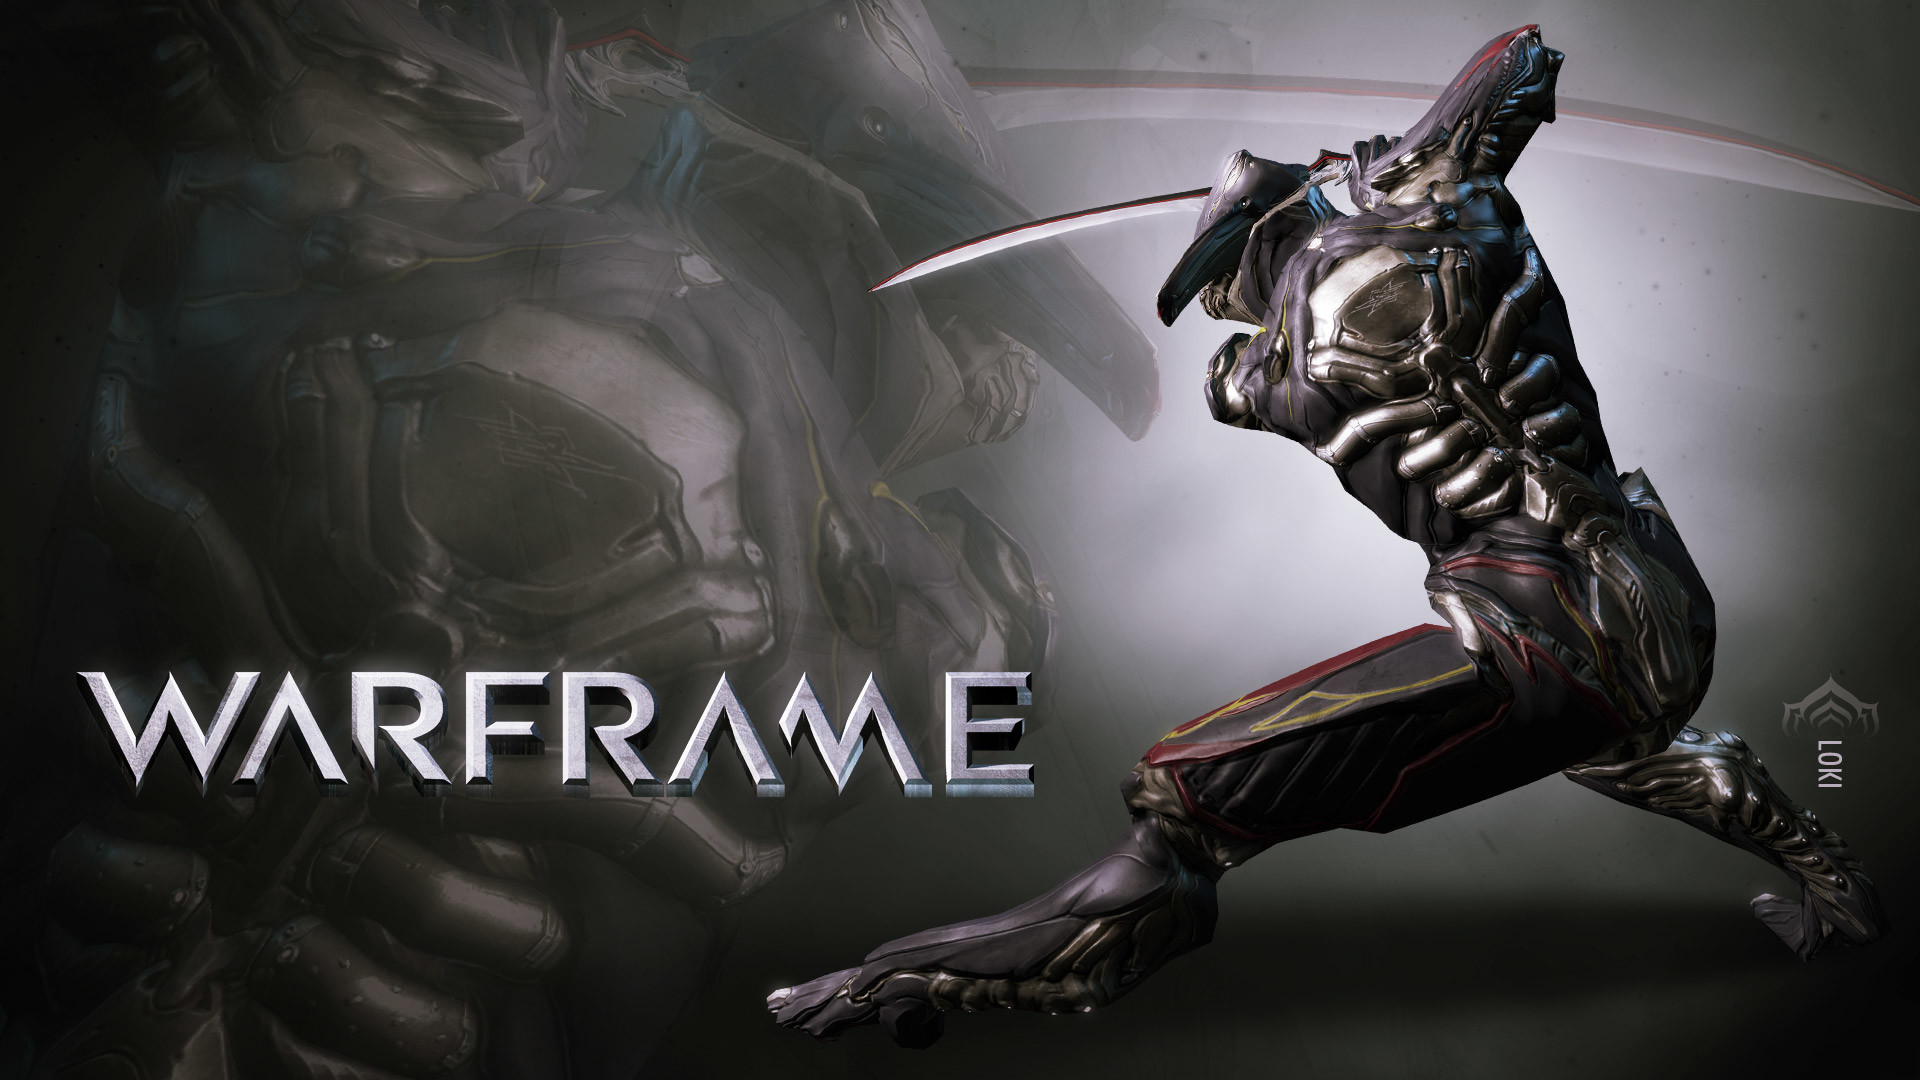 1920x1080 Mmo's images Warframe HD wallpaper and background photos